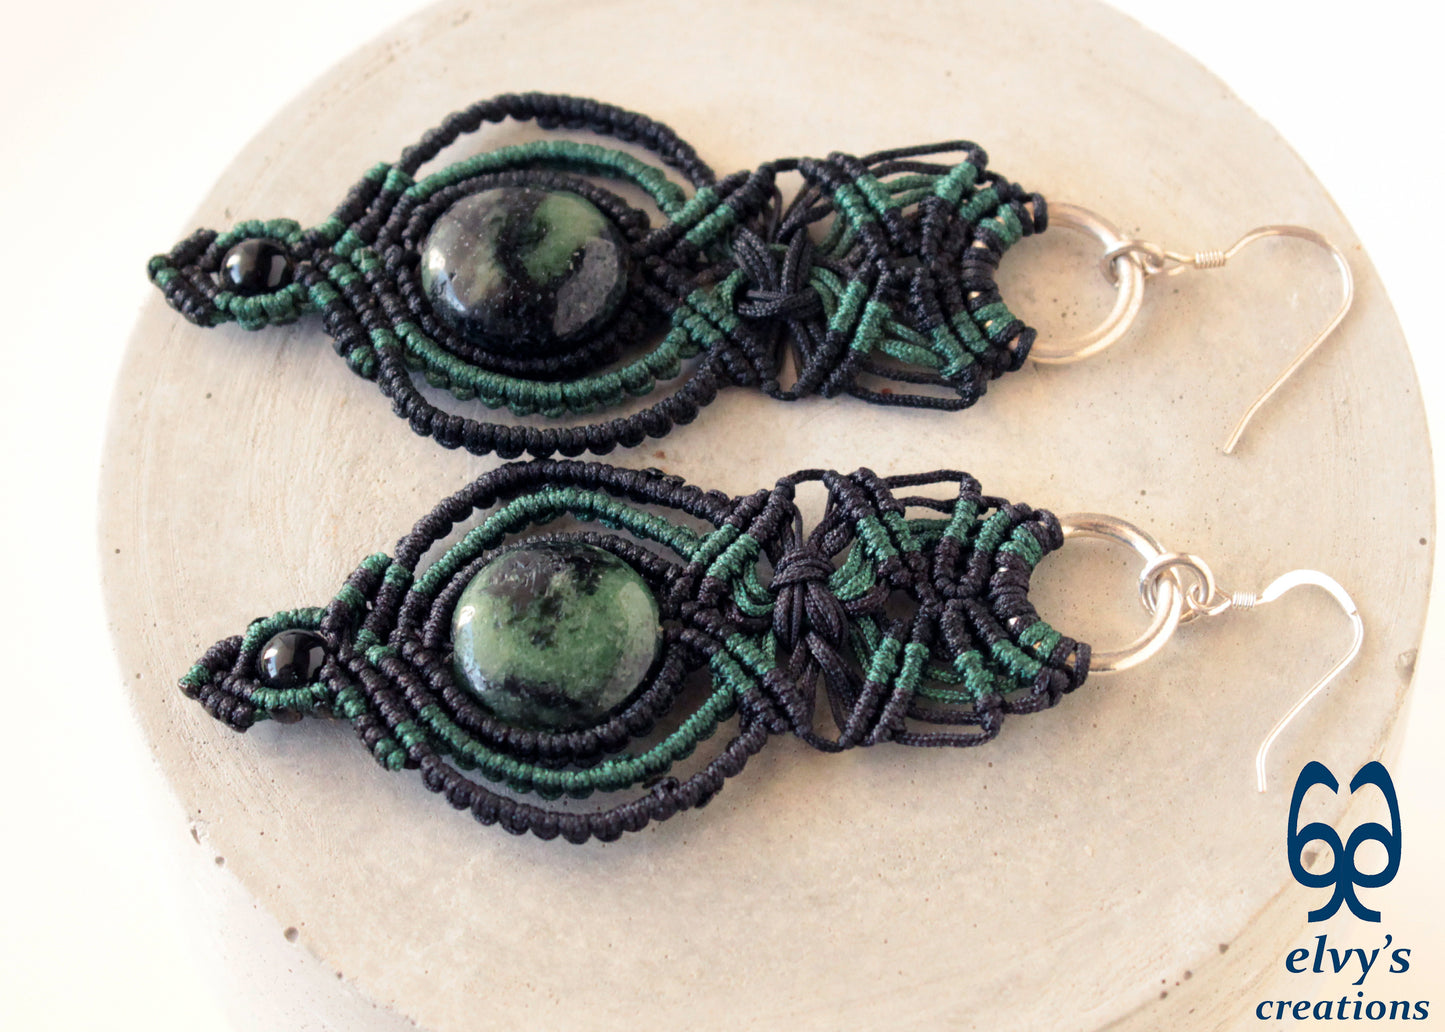 Black and Green Macrame Earrings with Onyx and Labradorite Gemstones